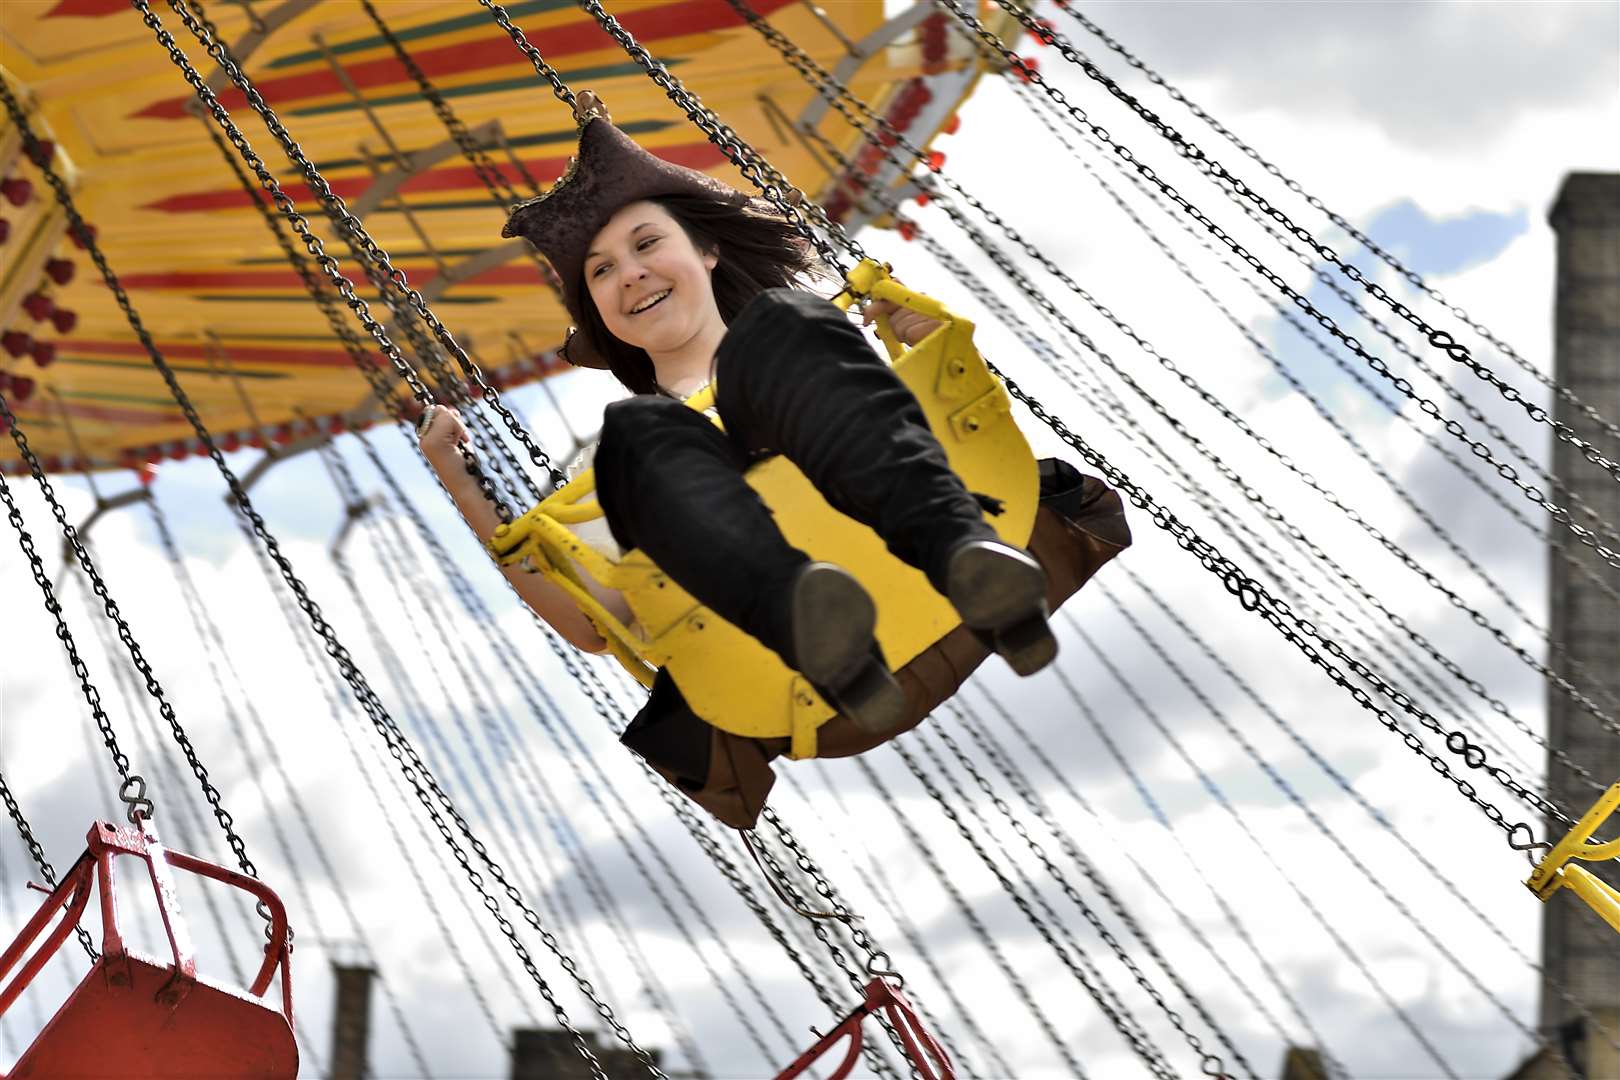 There will be a traditional funfair at the Festival of Steam and Transport